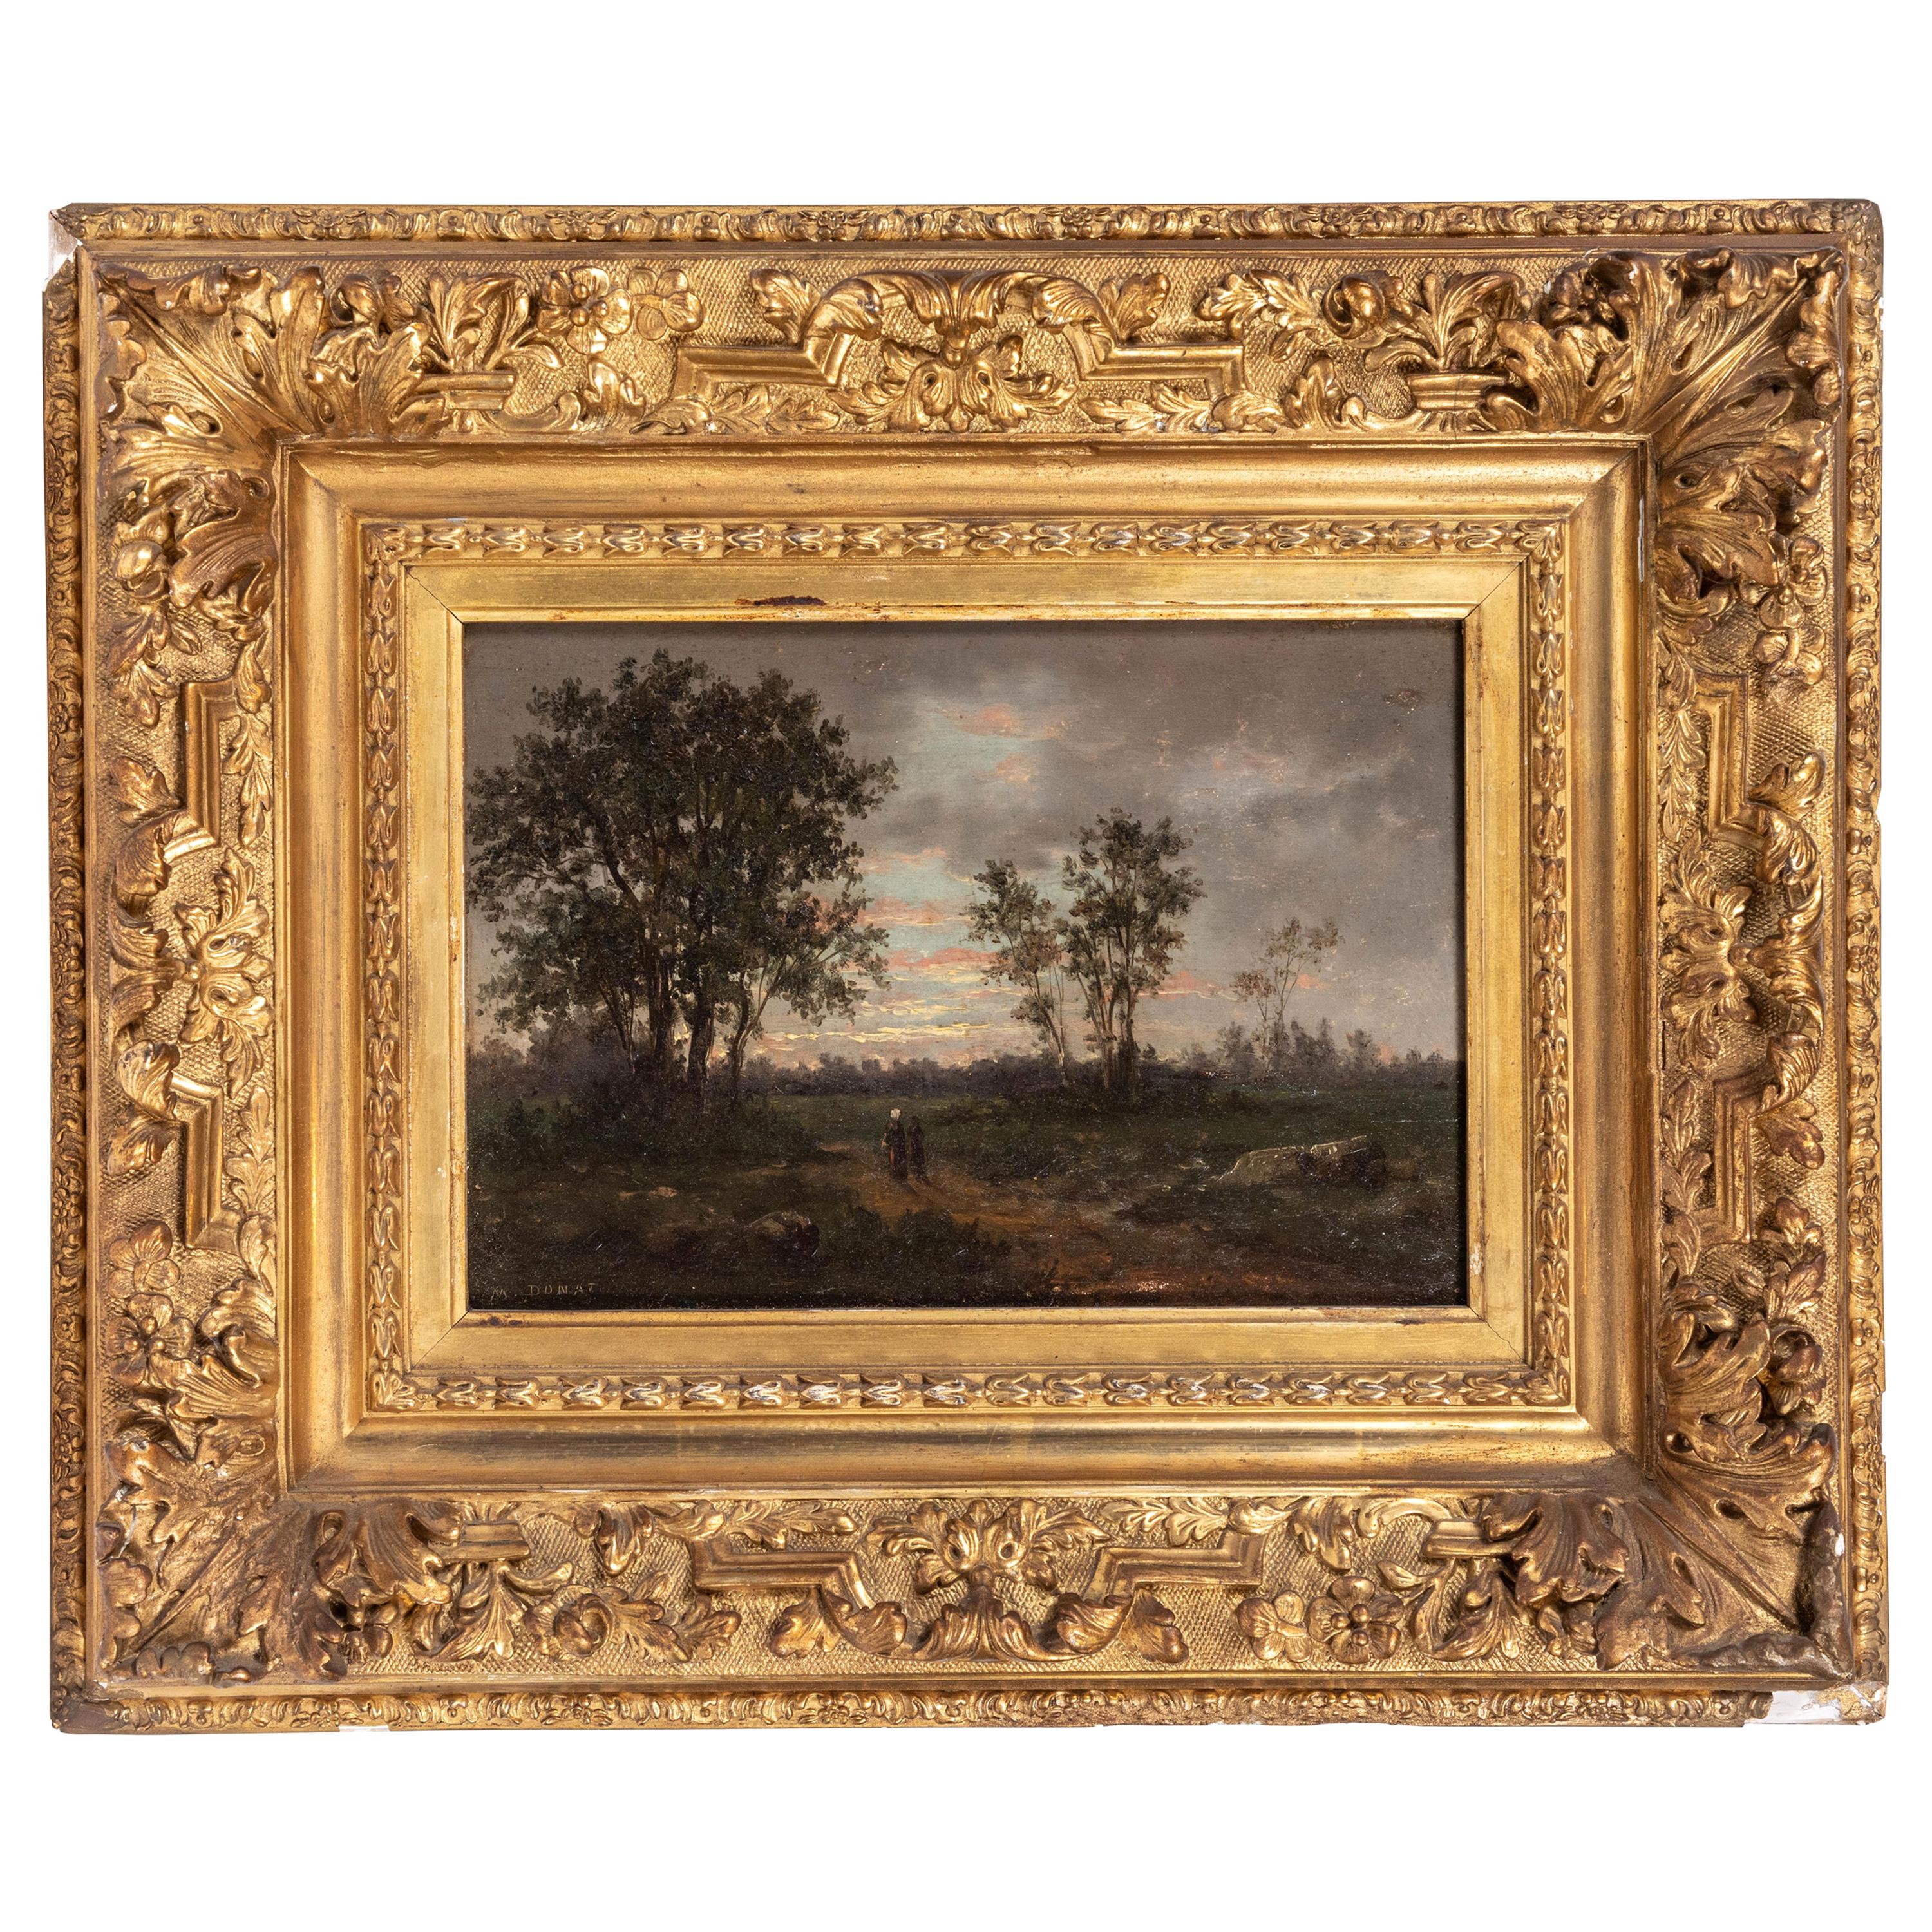 Period, Signed, Barbizon Oil Painting